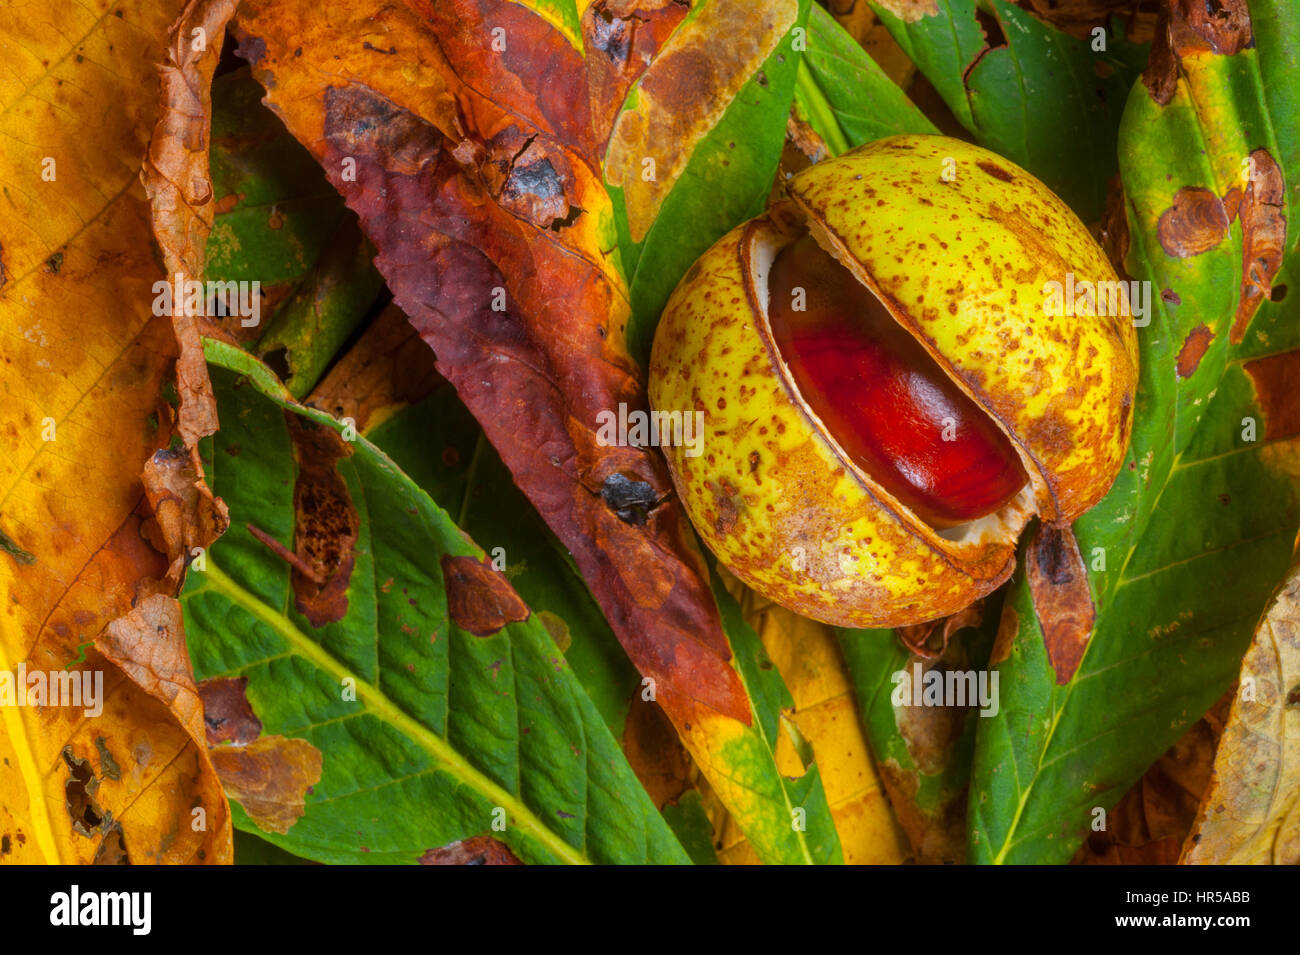 Horse chestnut conkers in the studio with Chestnut leave as a background. Stock Photo